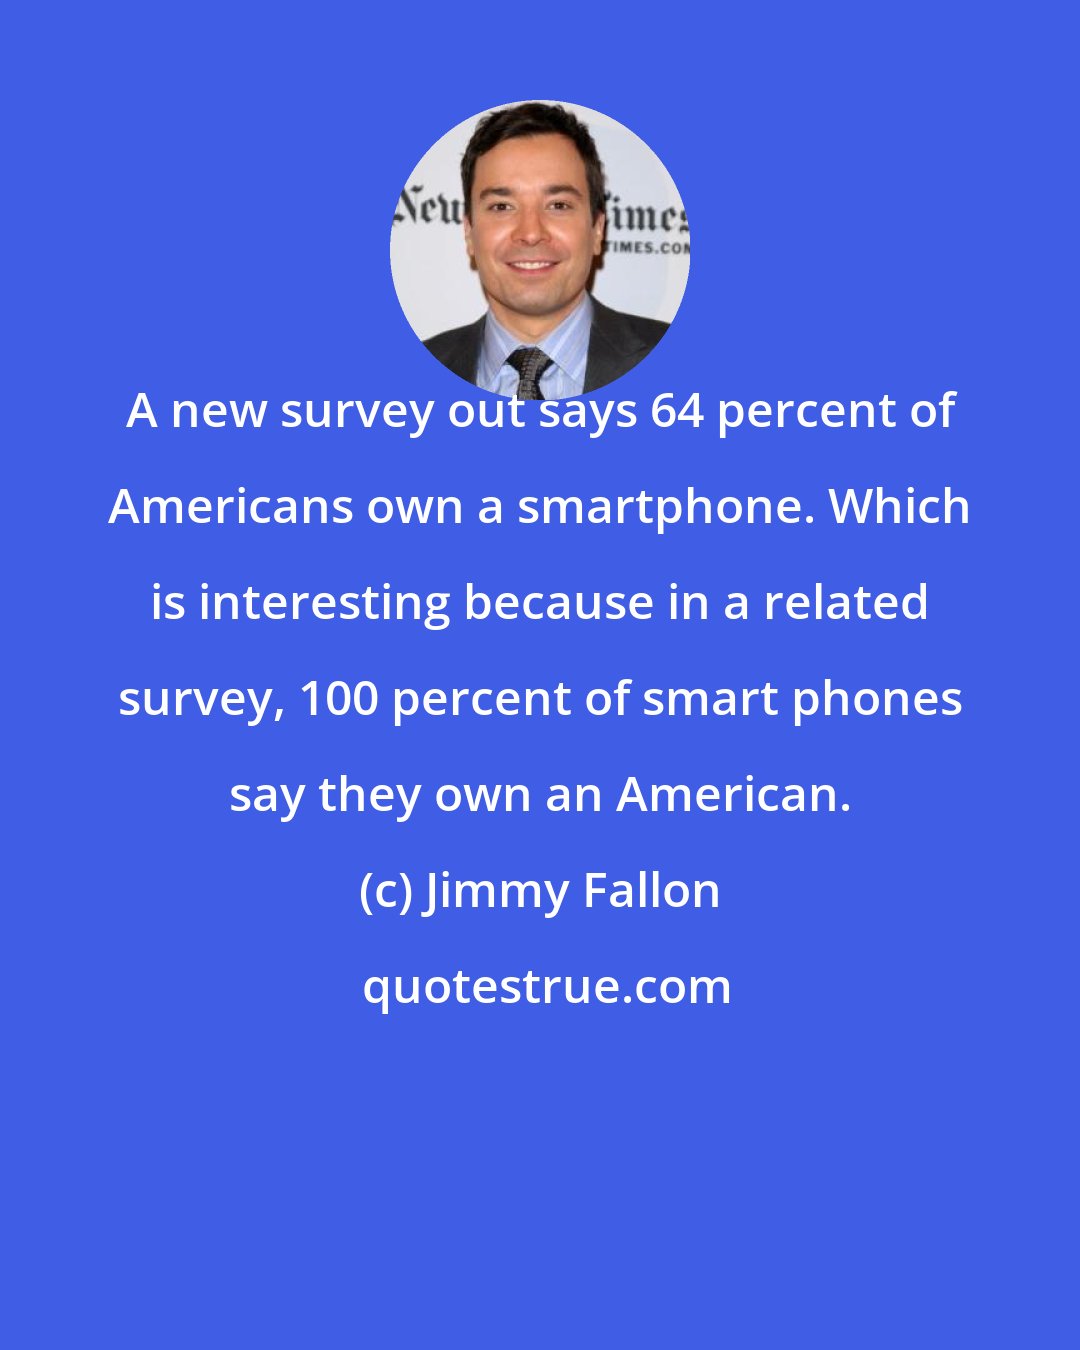 Jimmy Fallon: A new survey out says 64 percent of Americans own a smartphone. Which is interesting because in a related survey, 100 percent of smart phones say they own an American.